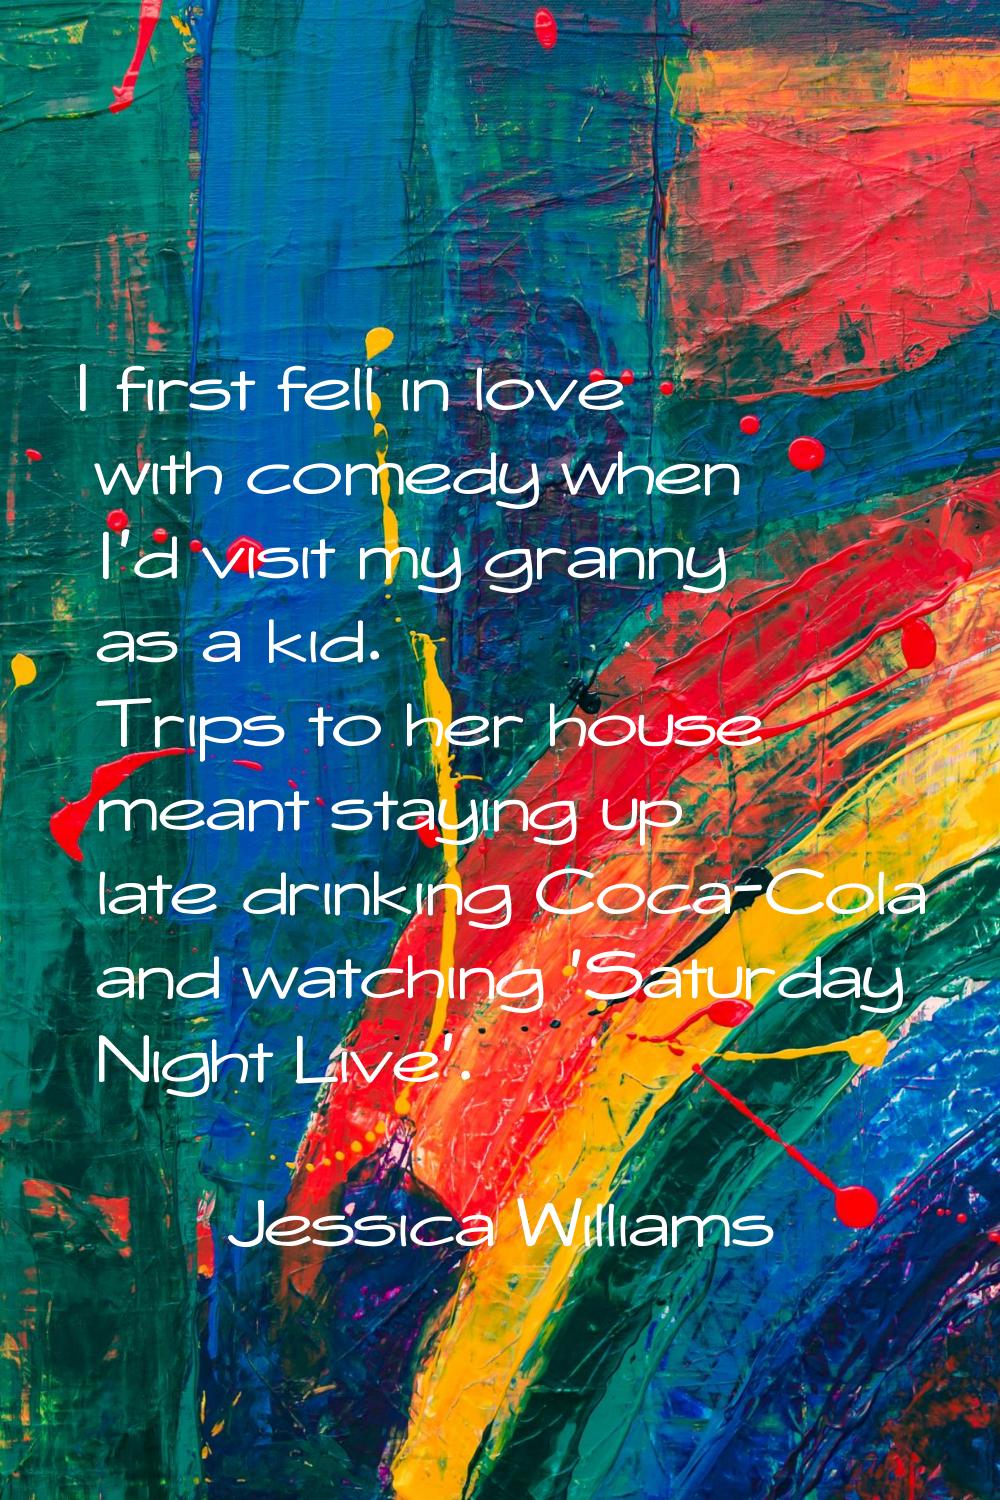 I first fell in love with comedy when I'd visit my granny as a kid. Trips to her house meant stayin